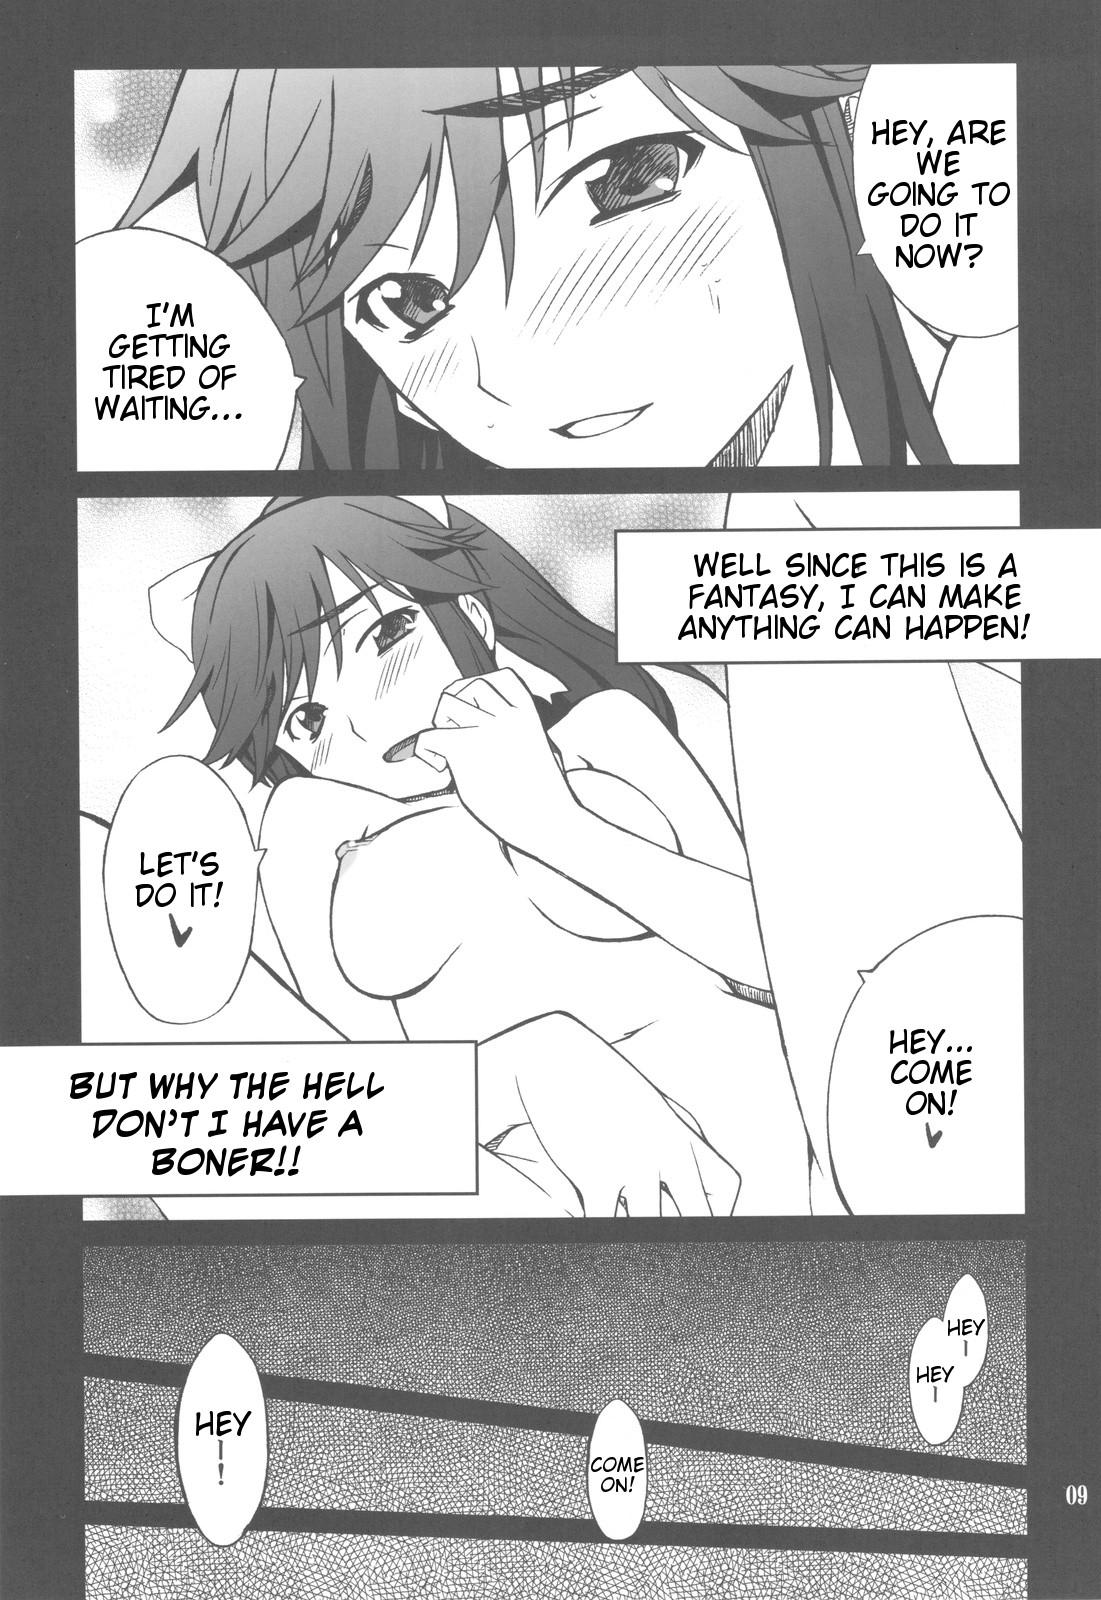 Spreading MANAKA - Love plus Phat Ass - Page 10